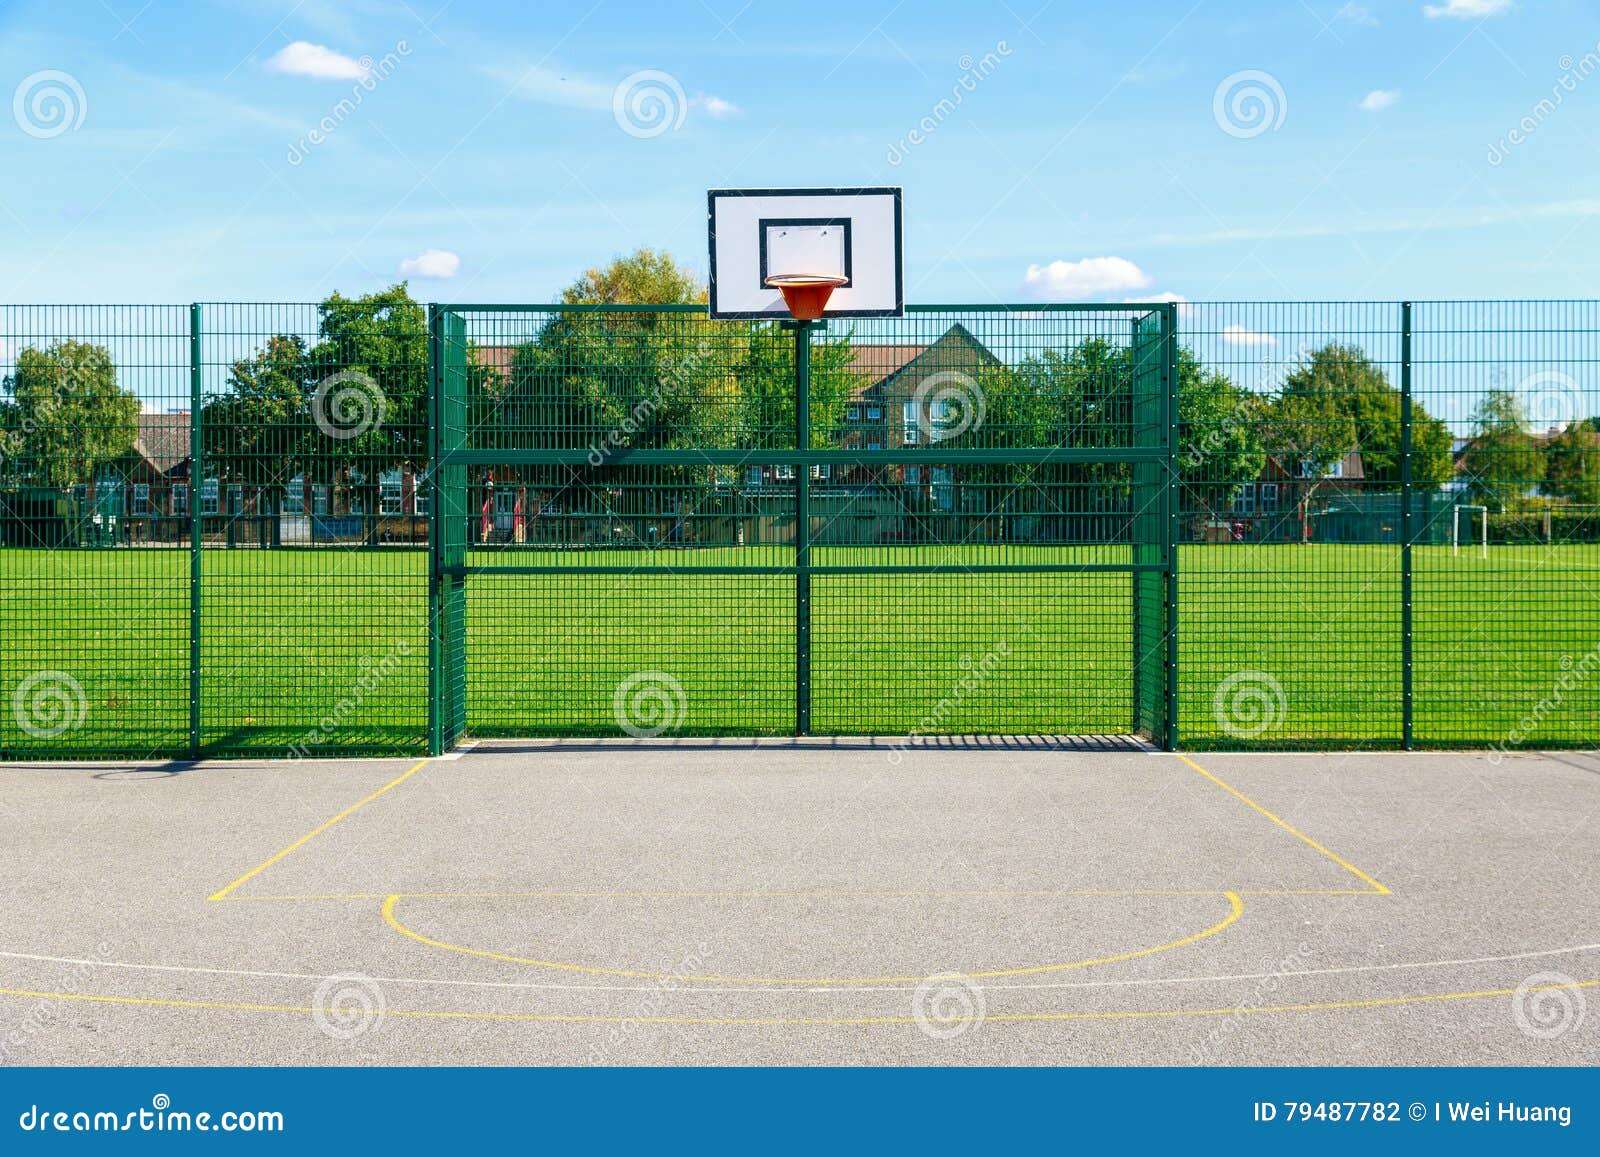 29,365 Basketball Court Photos - Free & Royalty-Free Stock Photos from